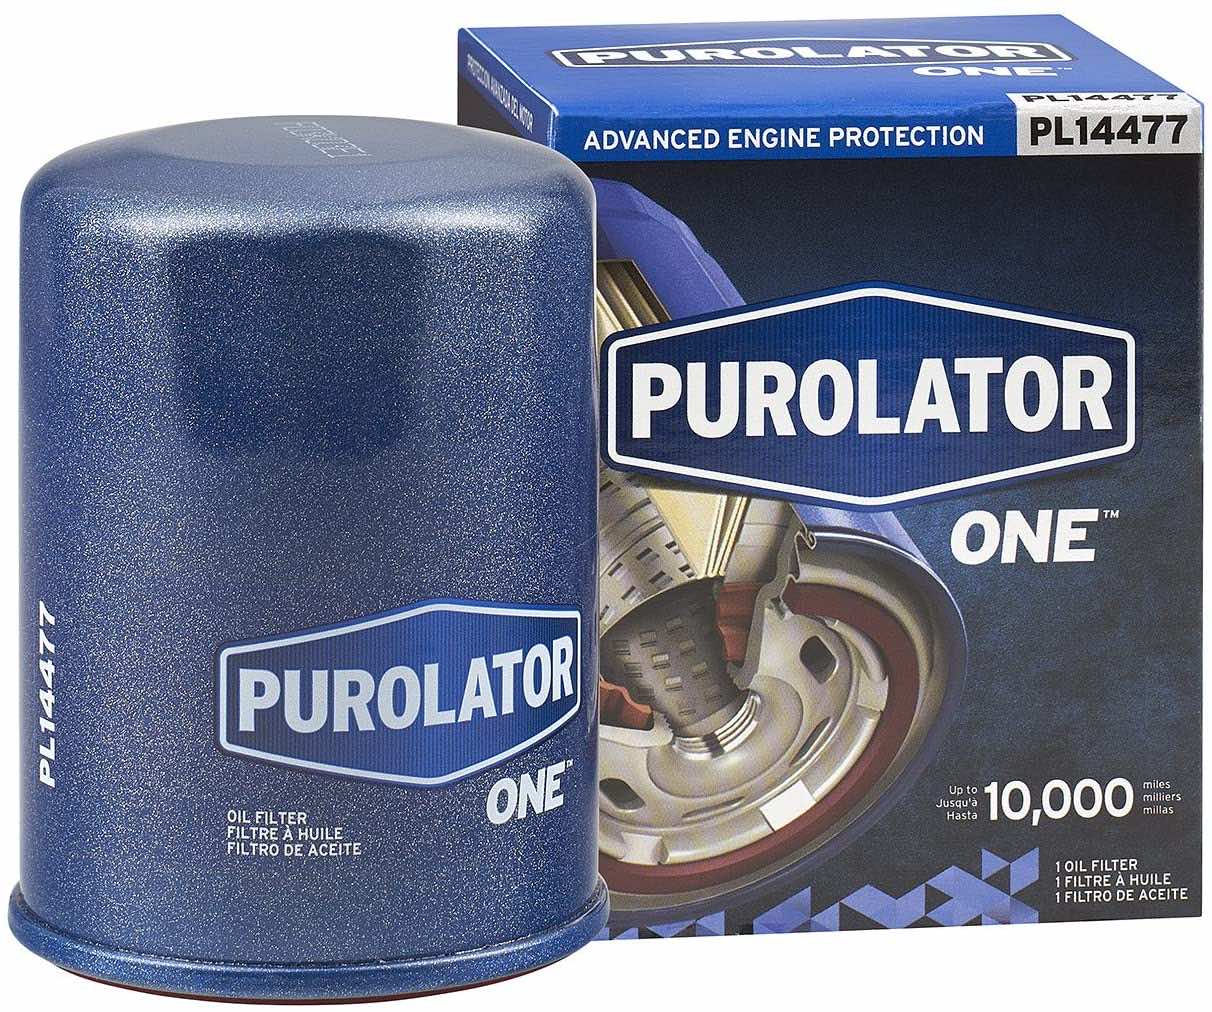 10 Best Oil Filters For Toyota Camry Wonderful Engineering